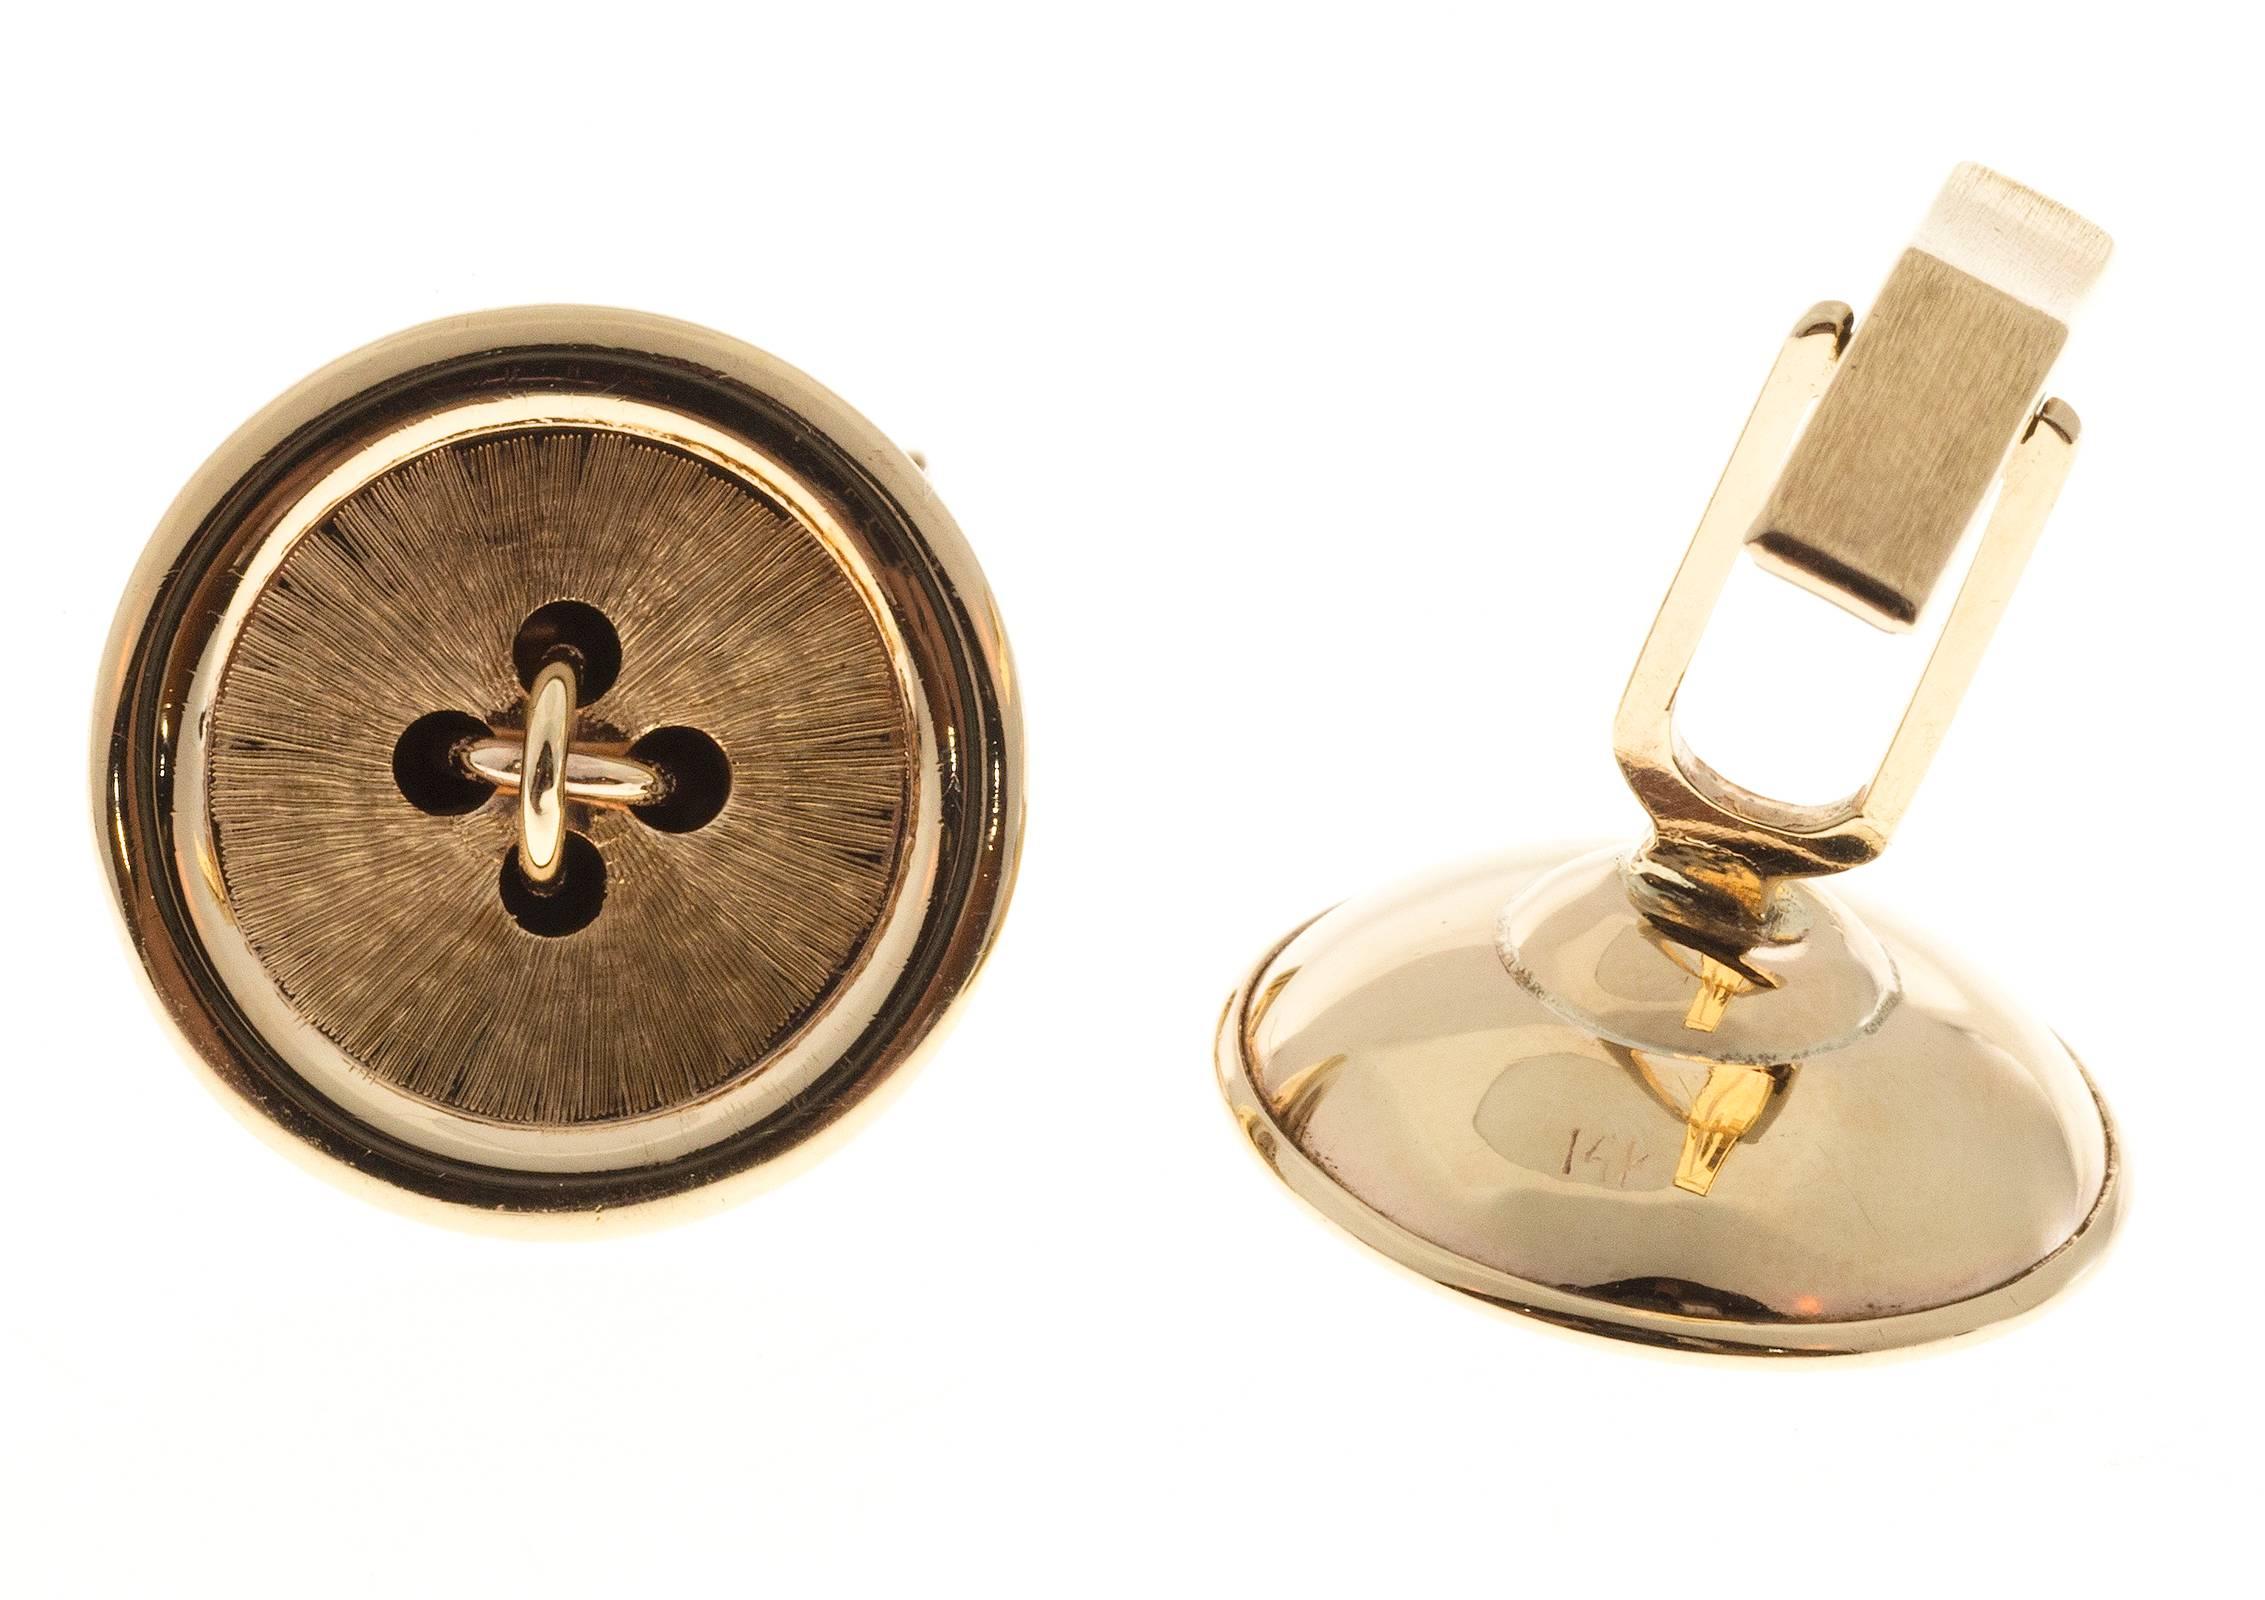 Classic solid gold 1950’s 14k yellow gold button style cufflinks.

14k yellow gold
Tested and stamped: 14k
8.5 grams
Top to bottom: 20.35mm or .80 inch
Width: 20.34mm or .80 inch
Depth: 7.33mm
